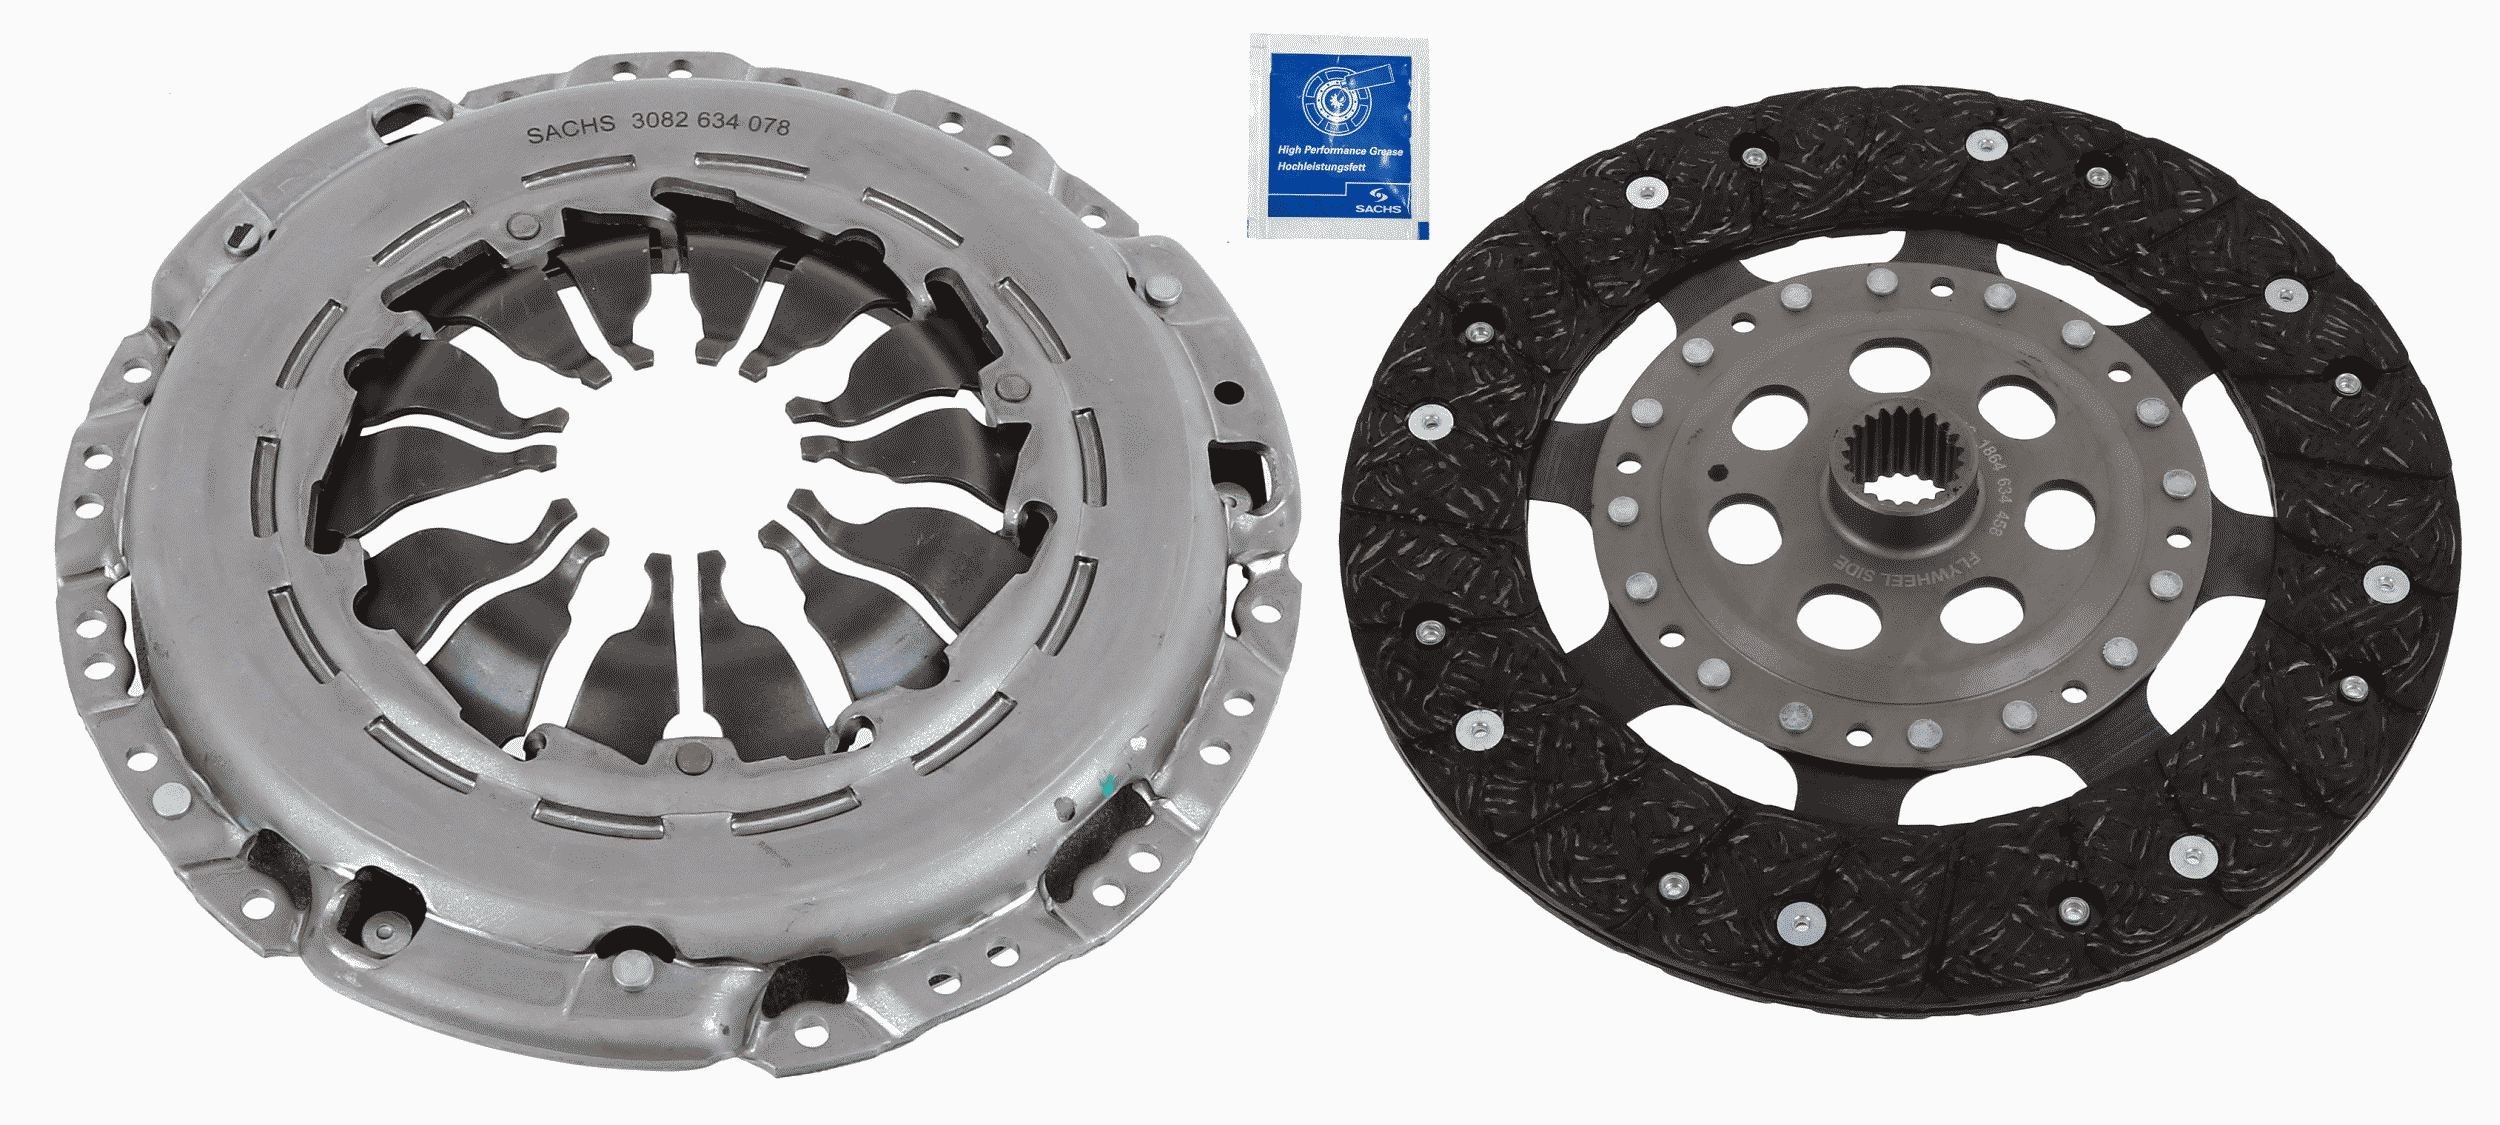 Great value for money - SACHS Clutch kit 3000 951 607